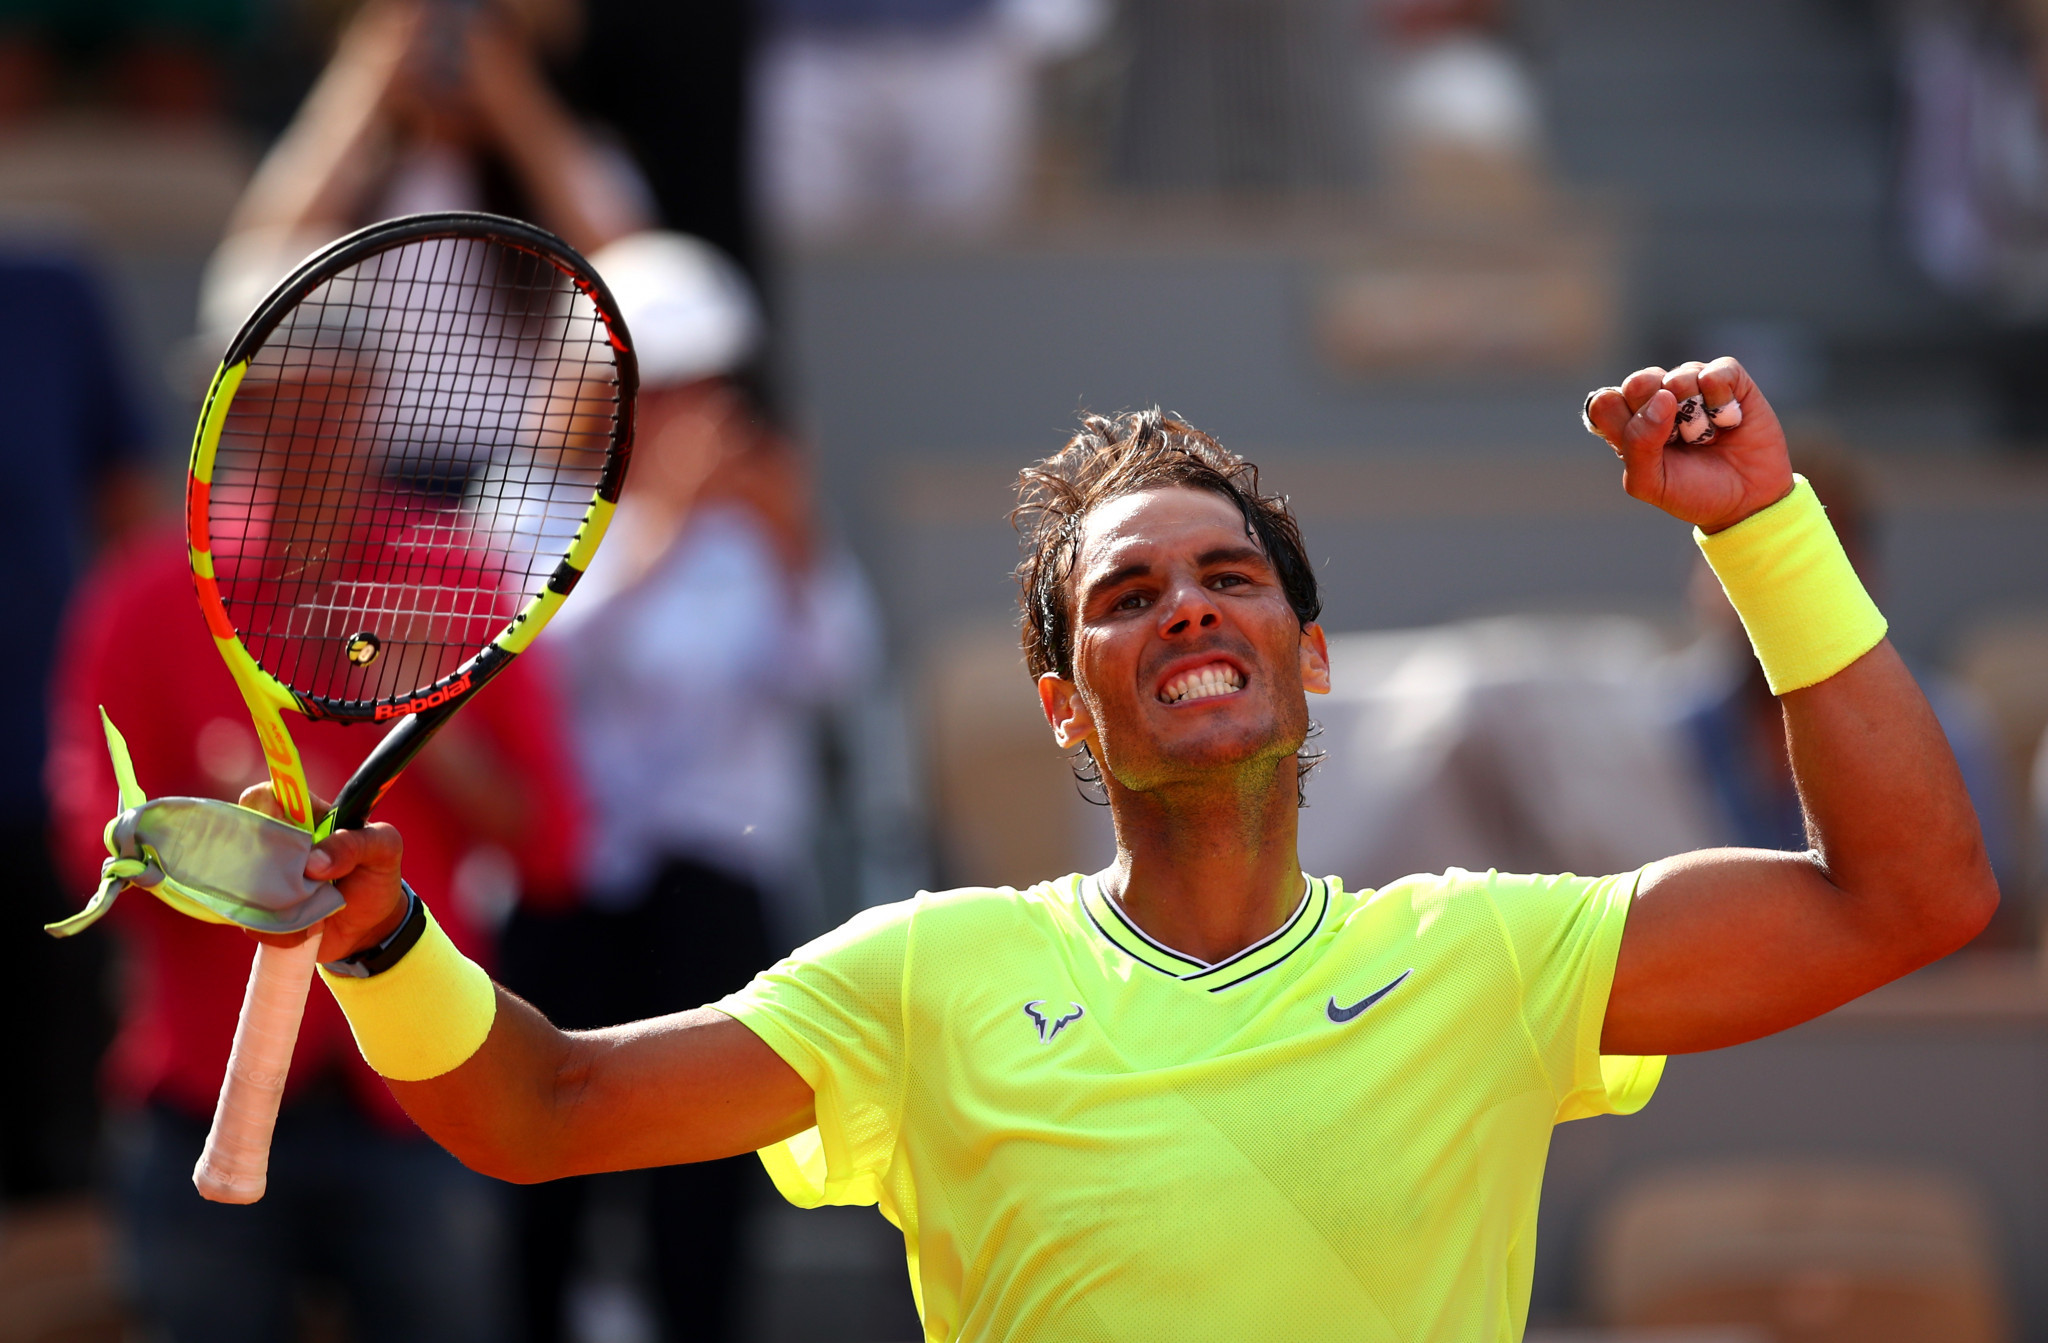 Smiles all round for Spaniard Nadal as he cruises into French Open last eight 